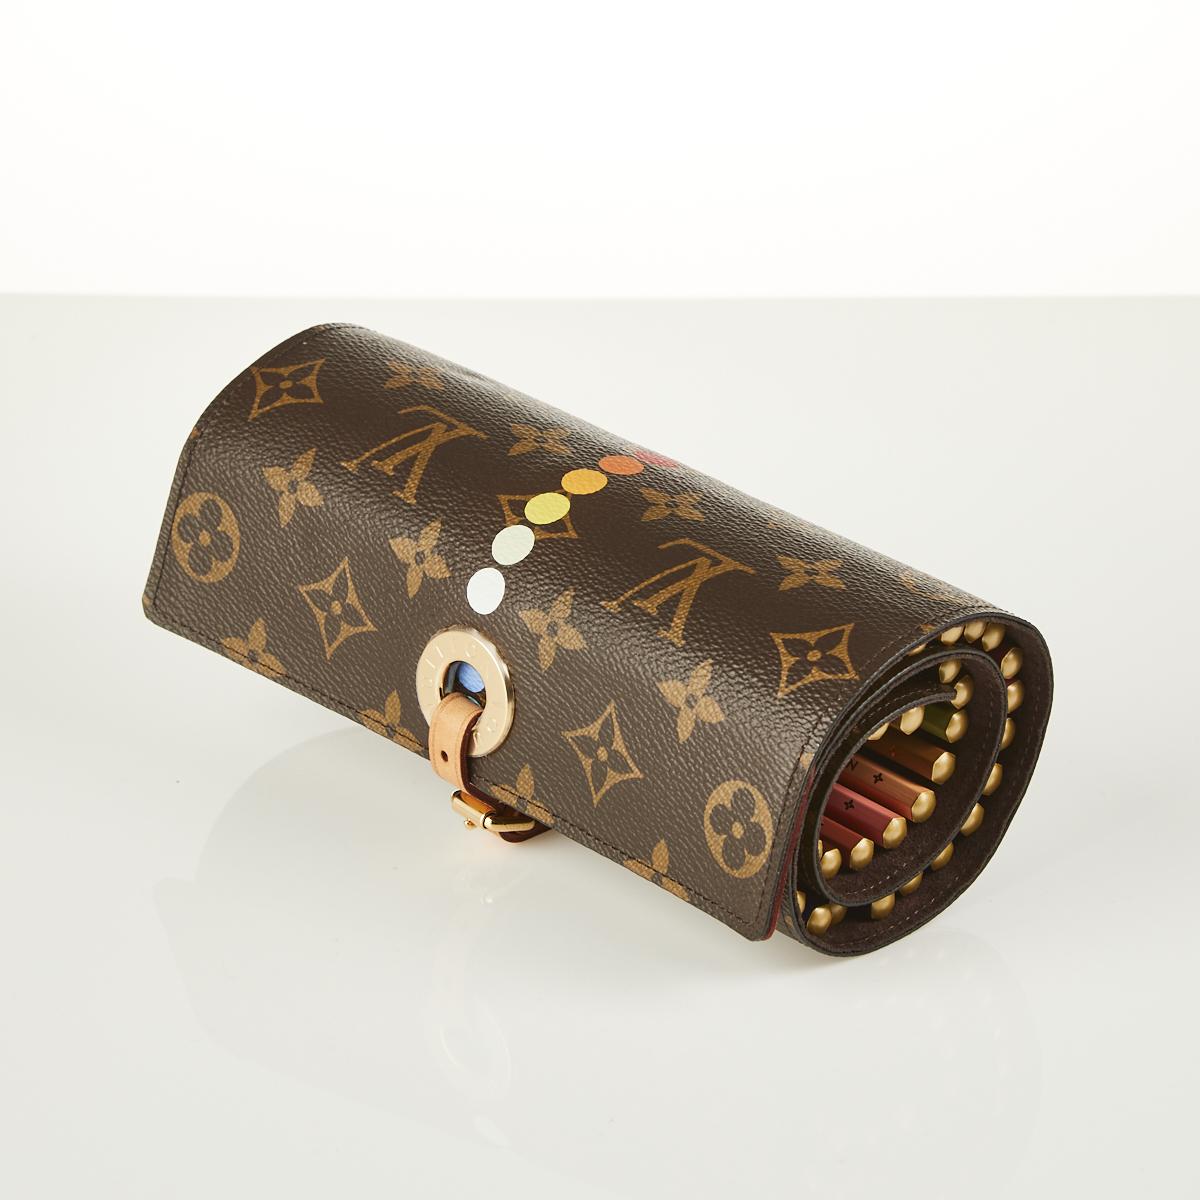 Louis Vuitton Will Be Releasing A 40 Color Pencil Case